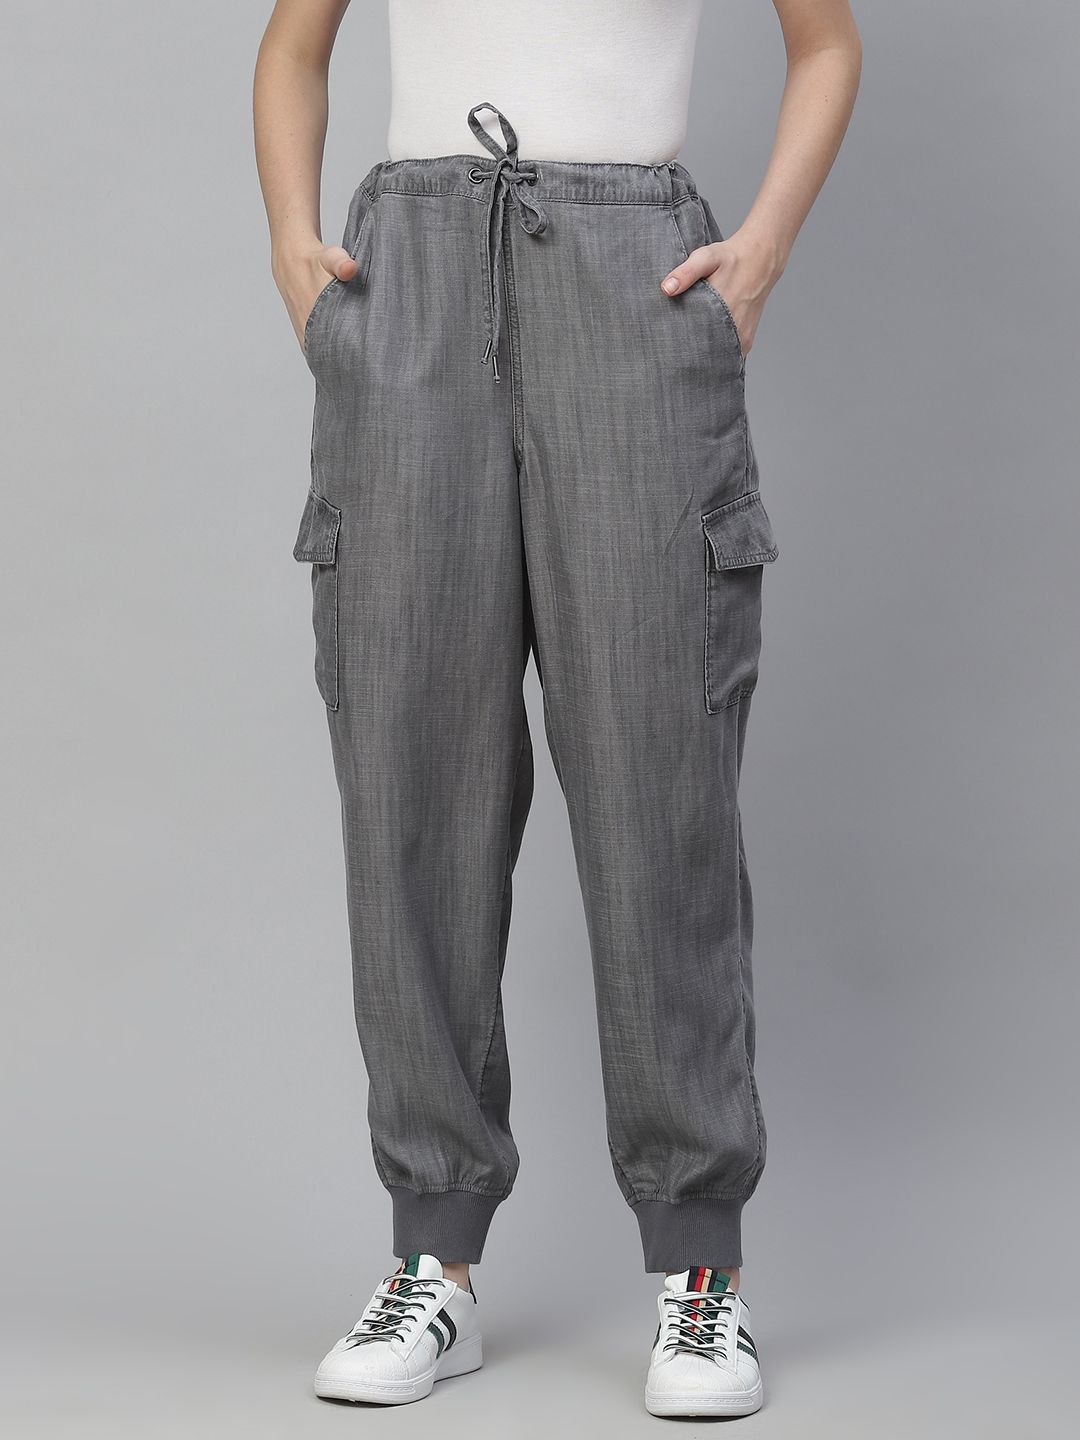 Marks & Spencer Women Grey Joggers Trousers Price in India